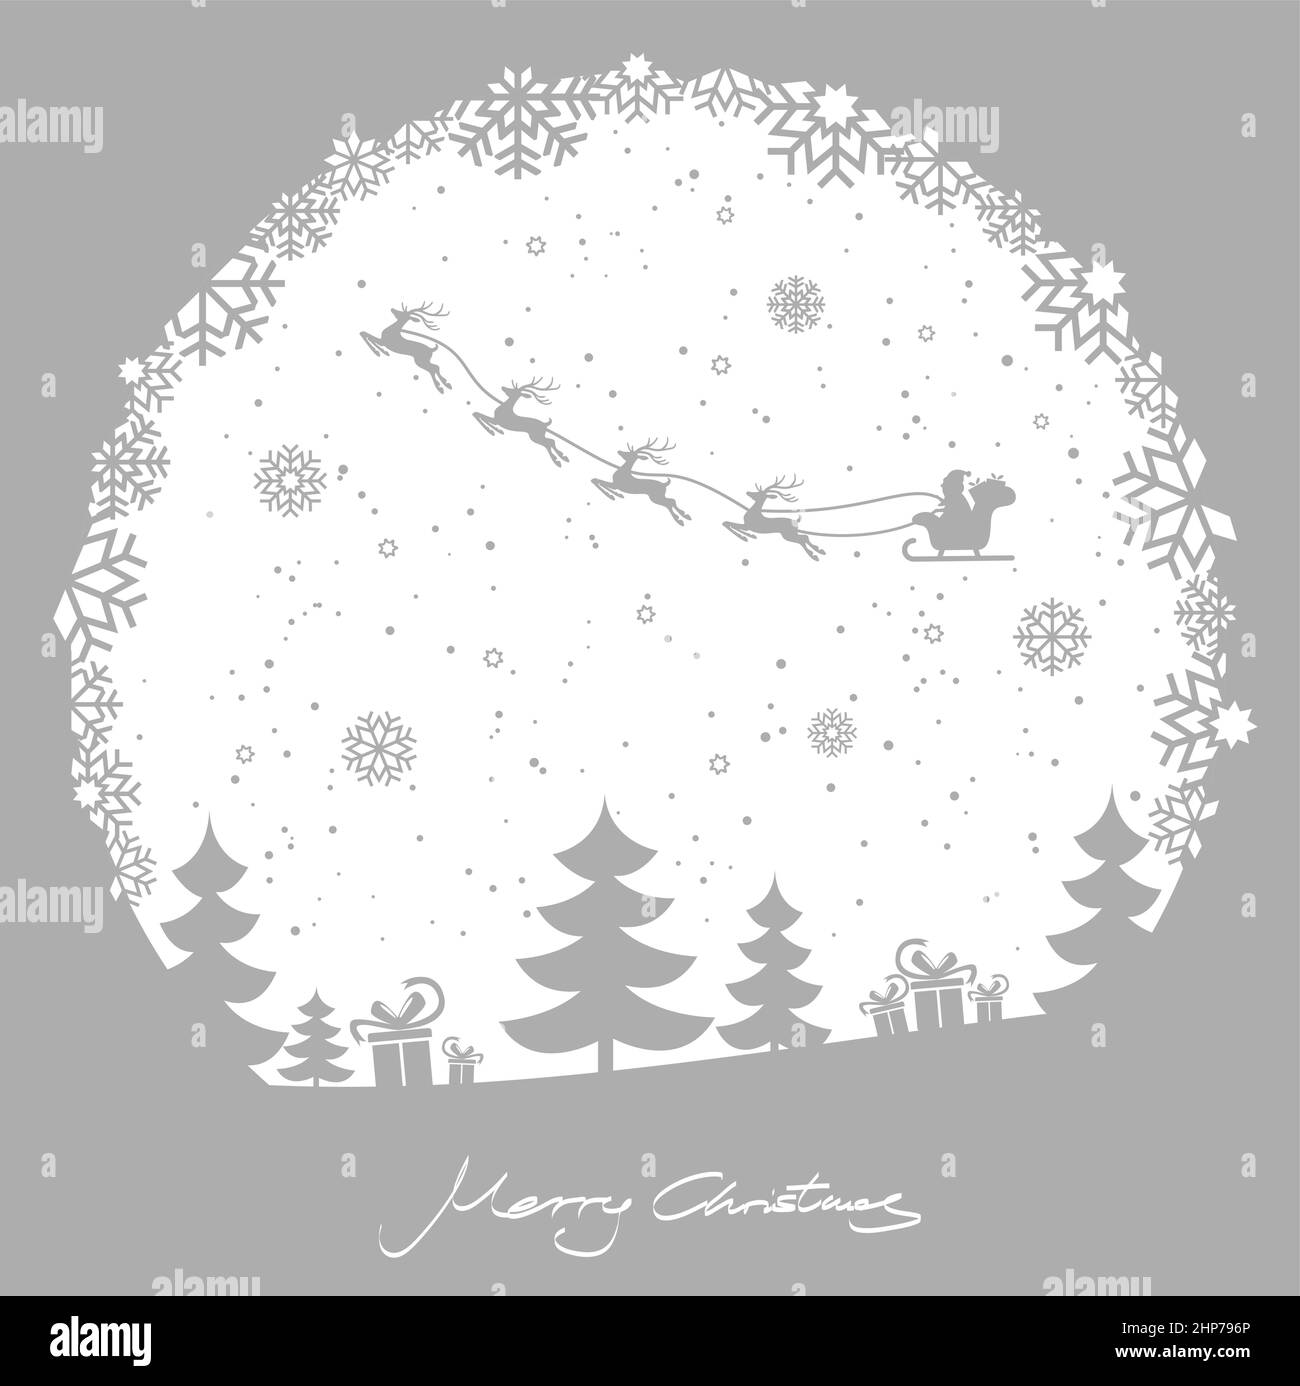 simple christmas background with typical elements Stock Vector